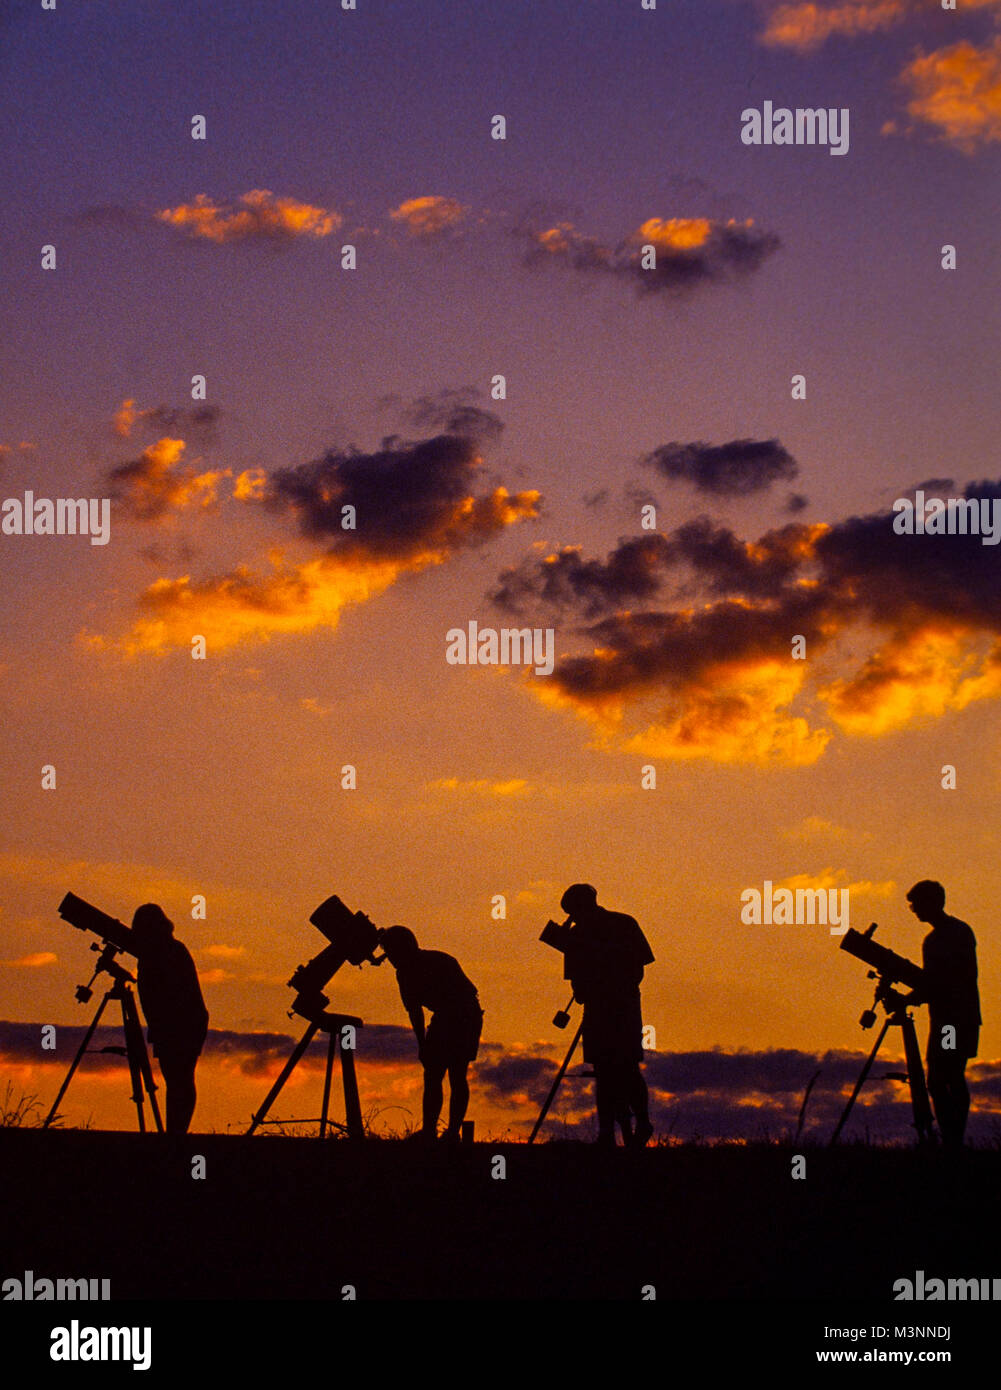 Amateur astronomers with their telescopes wait for the dusk skies to darken. Stock Photo